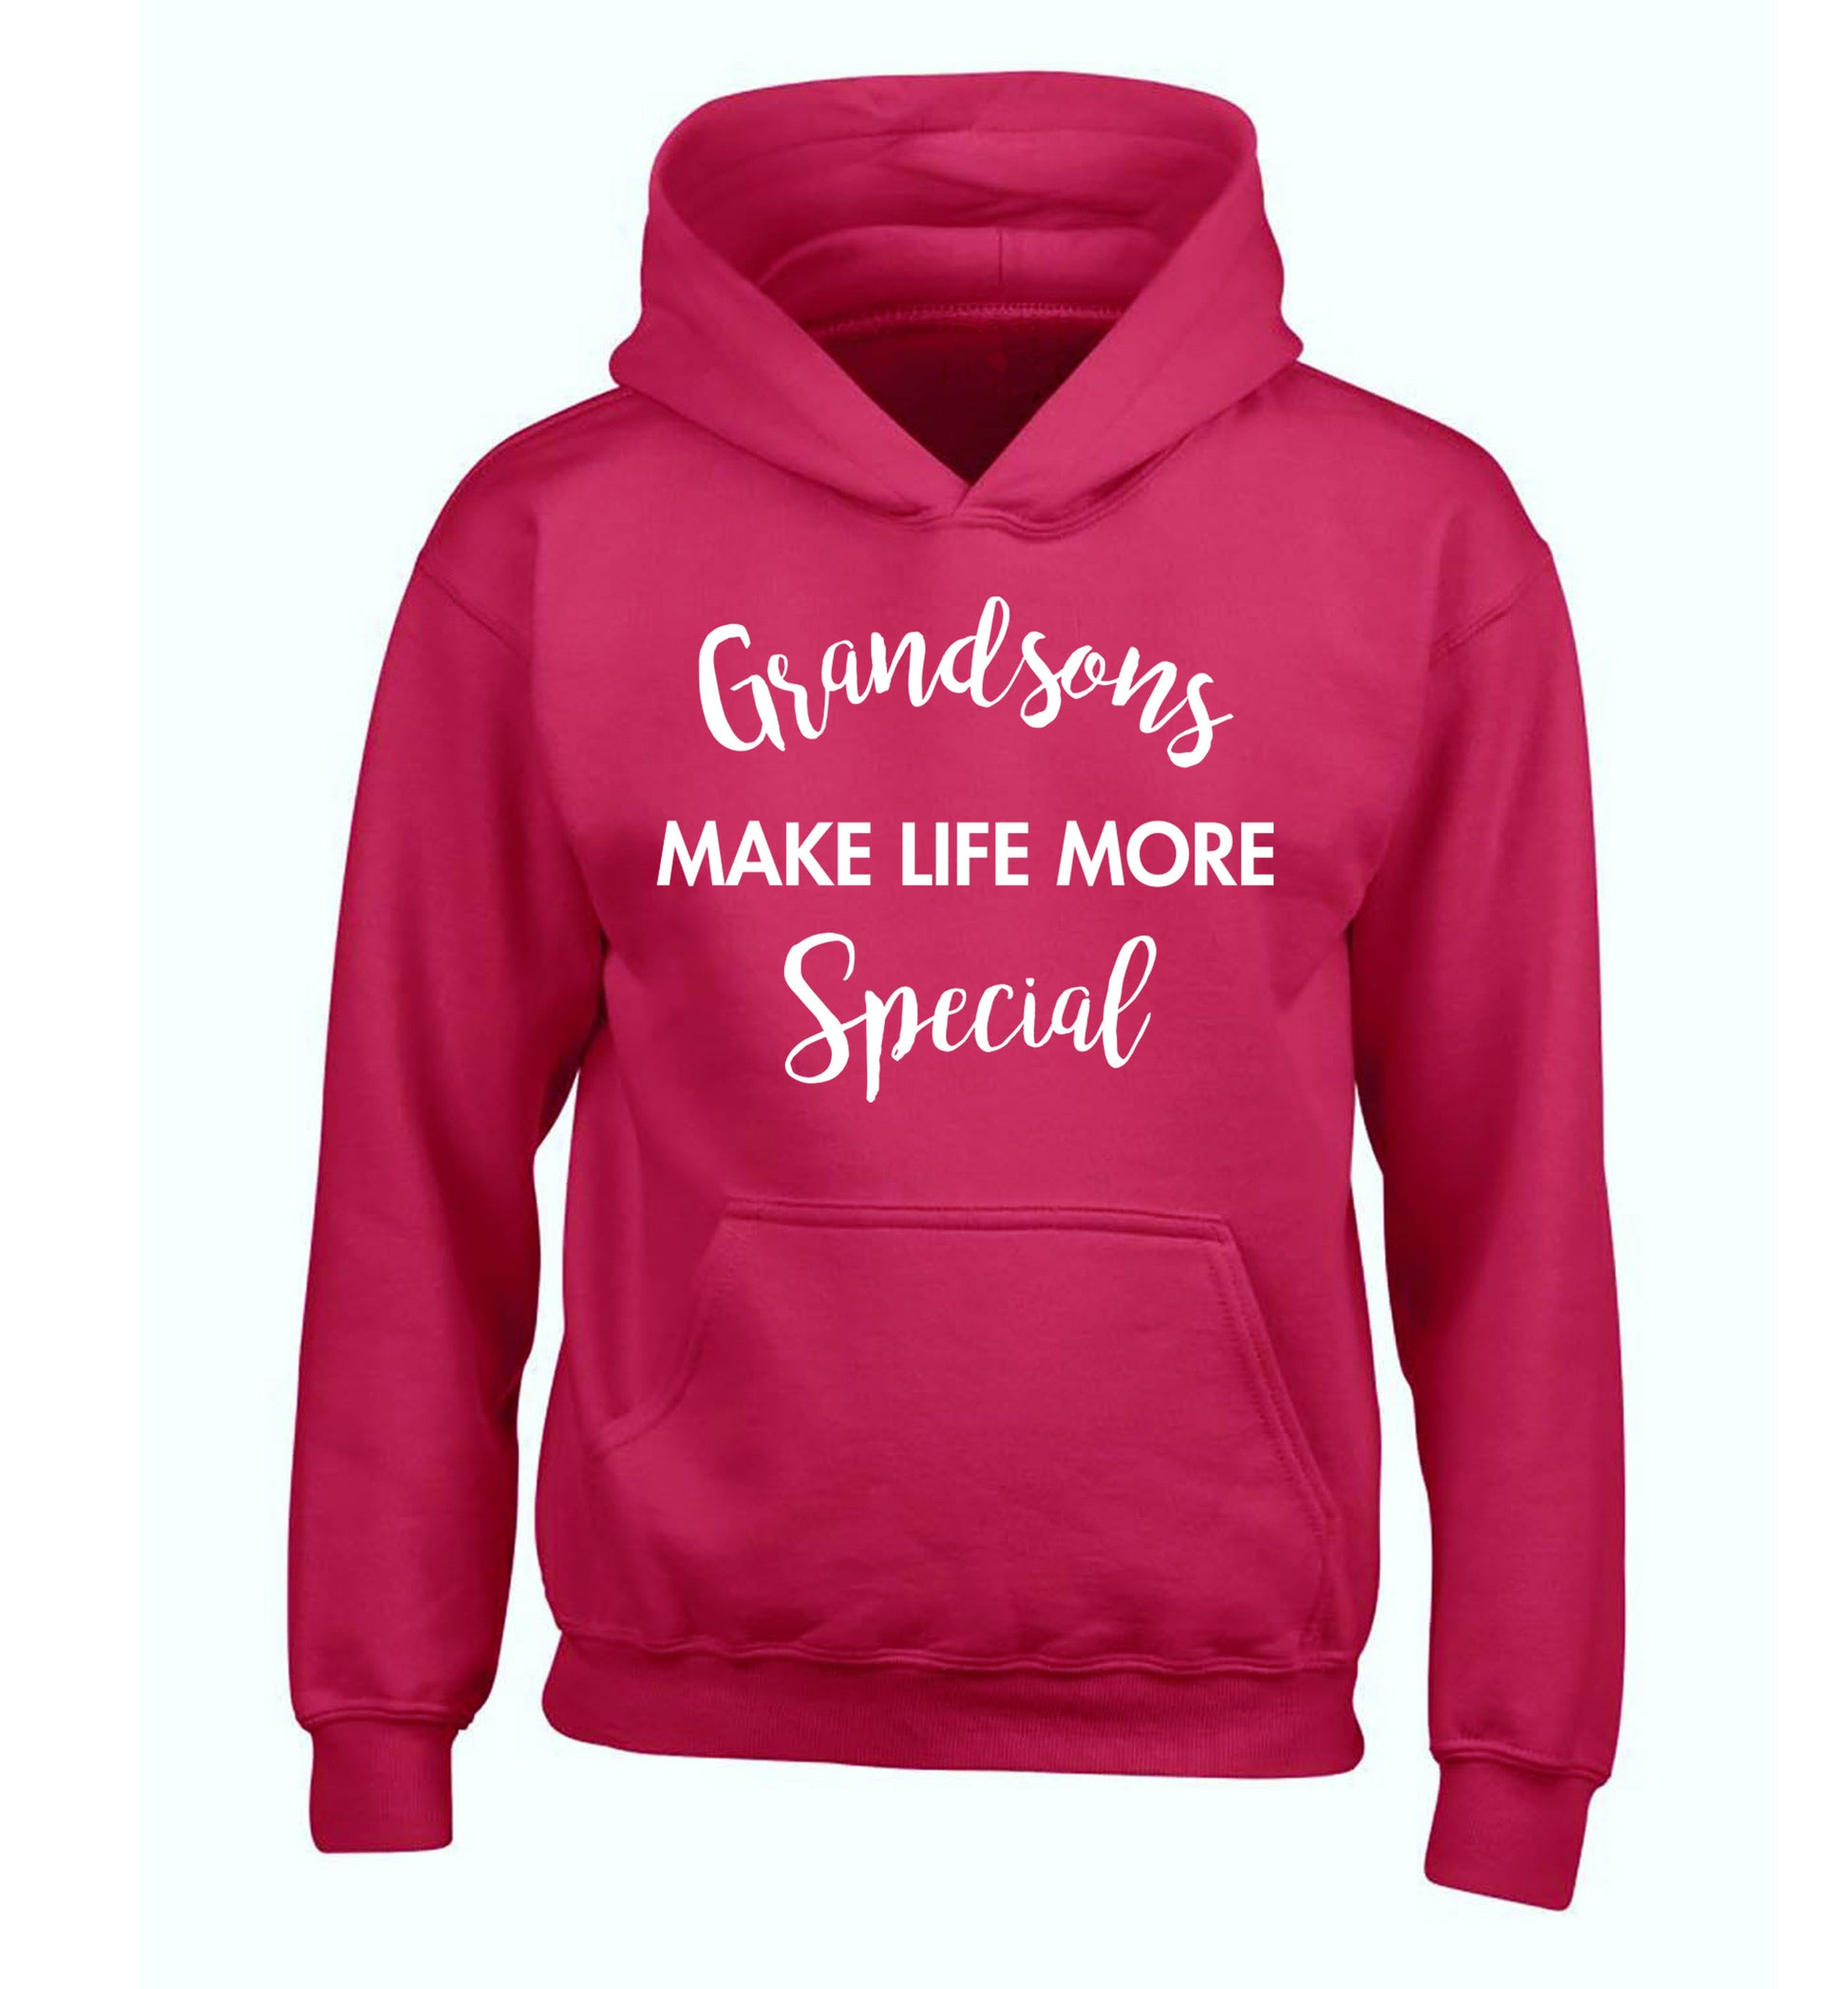 Grandsons make life more special children's pink hoodie 12-14 Years